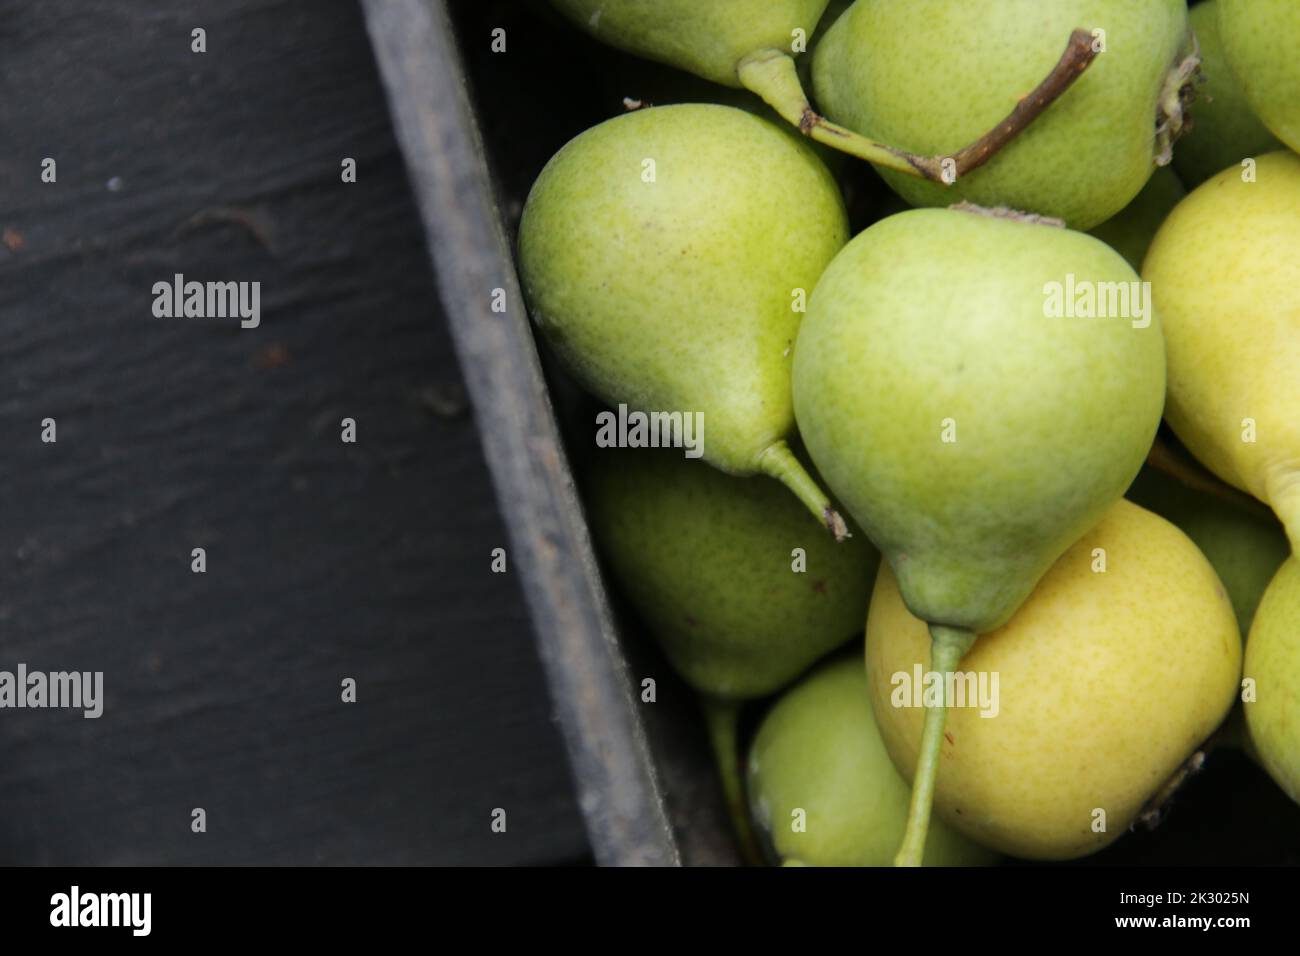 Ripe pears in a box on the table. Place for text. Stock Photo